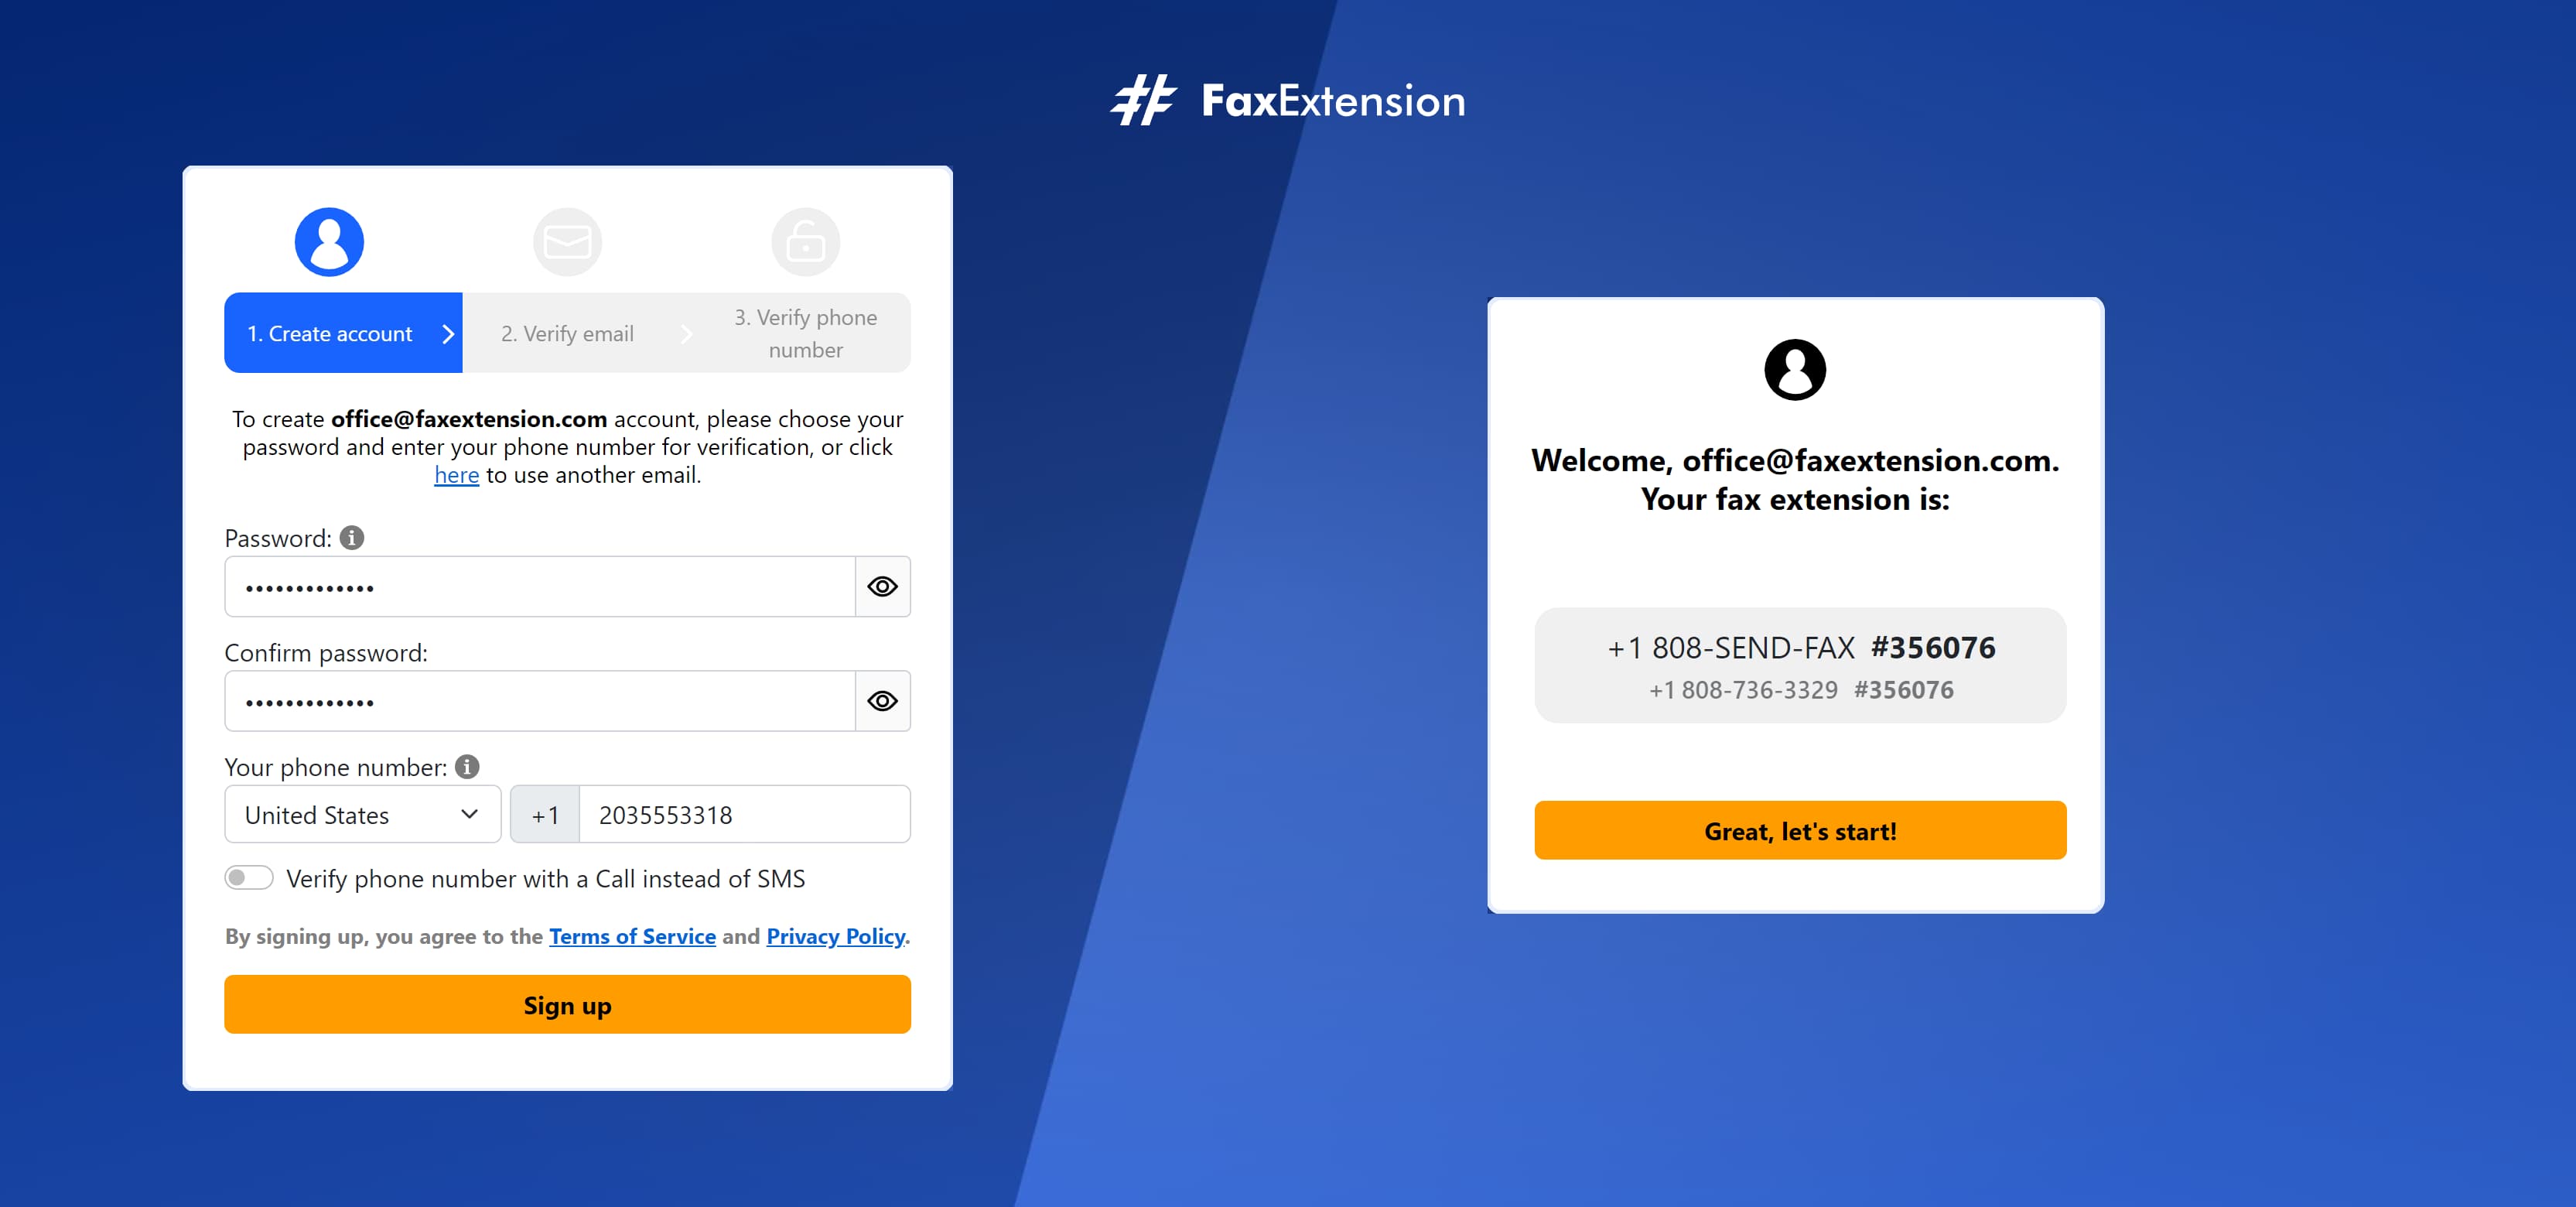 Get your own free fax extension number instantly and send fax from iPhone